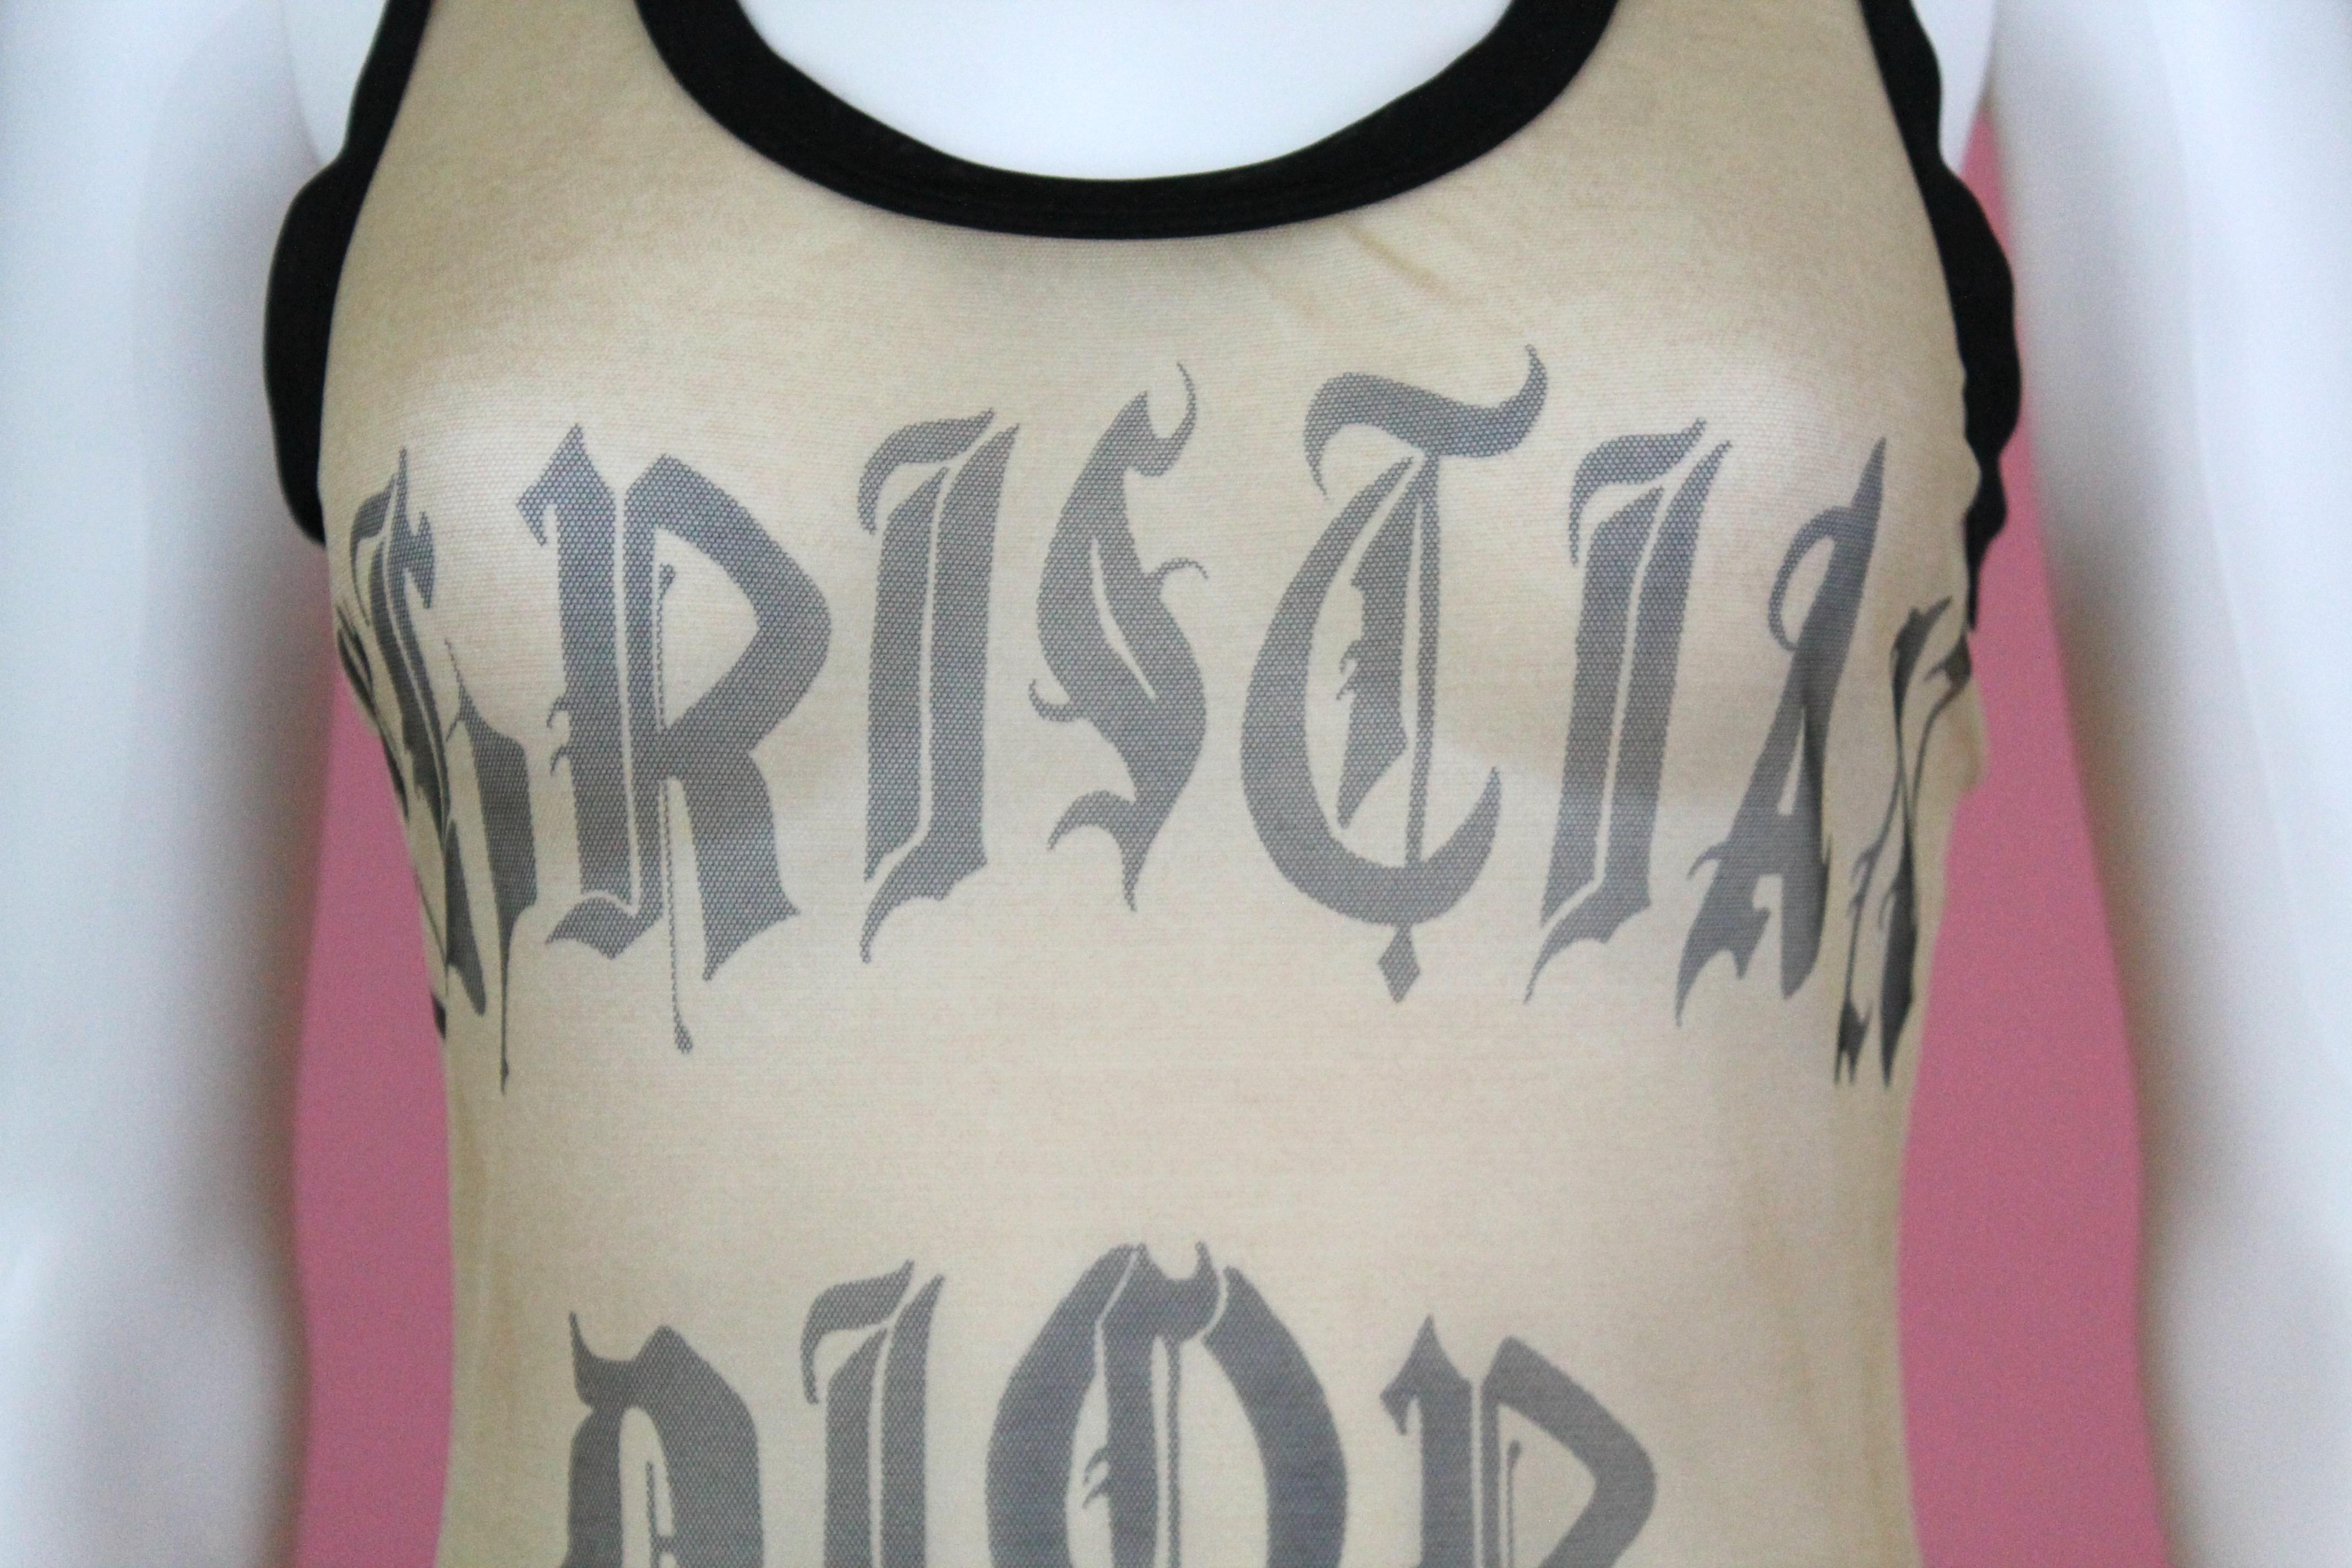 -Iconic Galliano for Diorpiece from Spring Summer 2002 runway
-Features Christian Dior logo on front with 1947 on back, in gothic type font
-Made in France
-Size US 8 but best fitting US 6 
-Could be a muscle shirt on the right guy.

Approximate